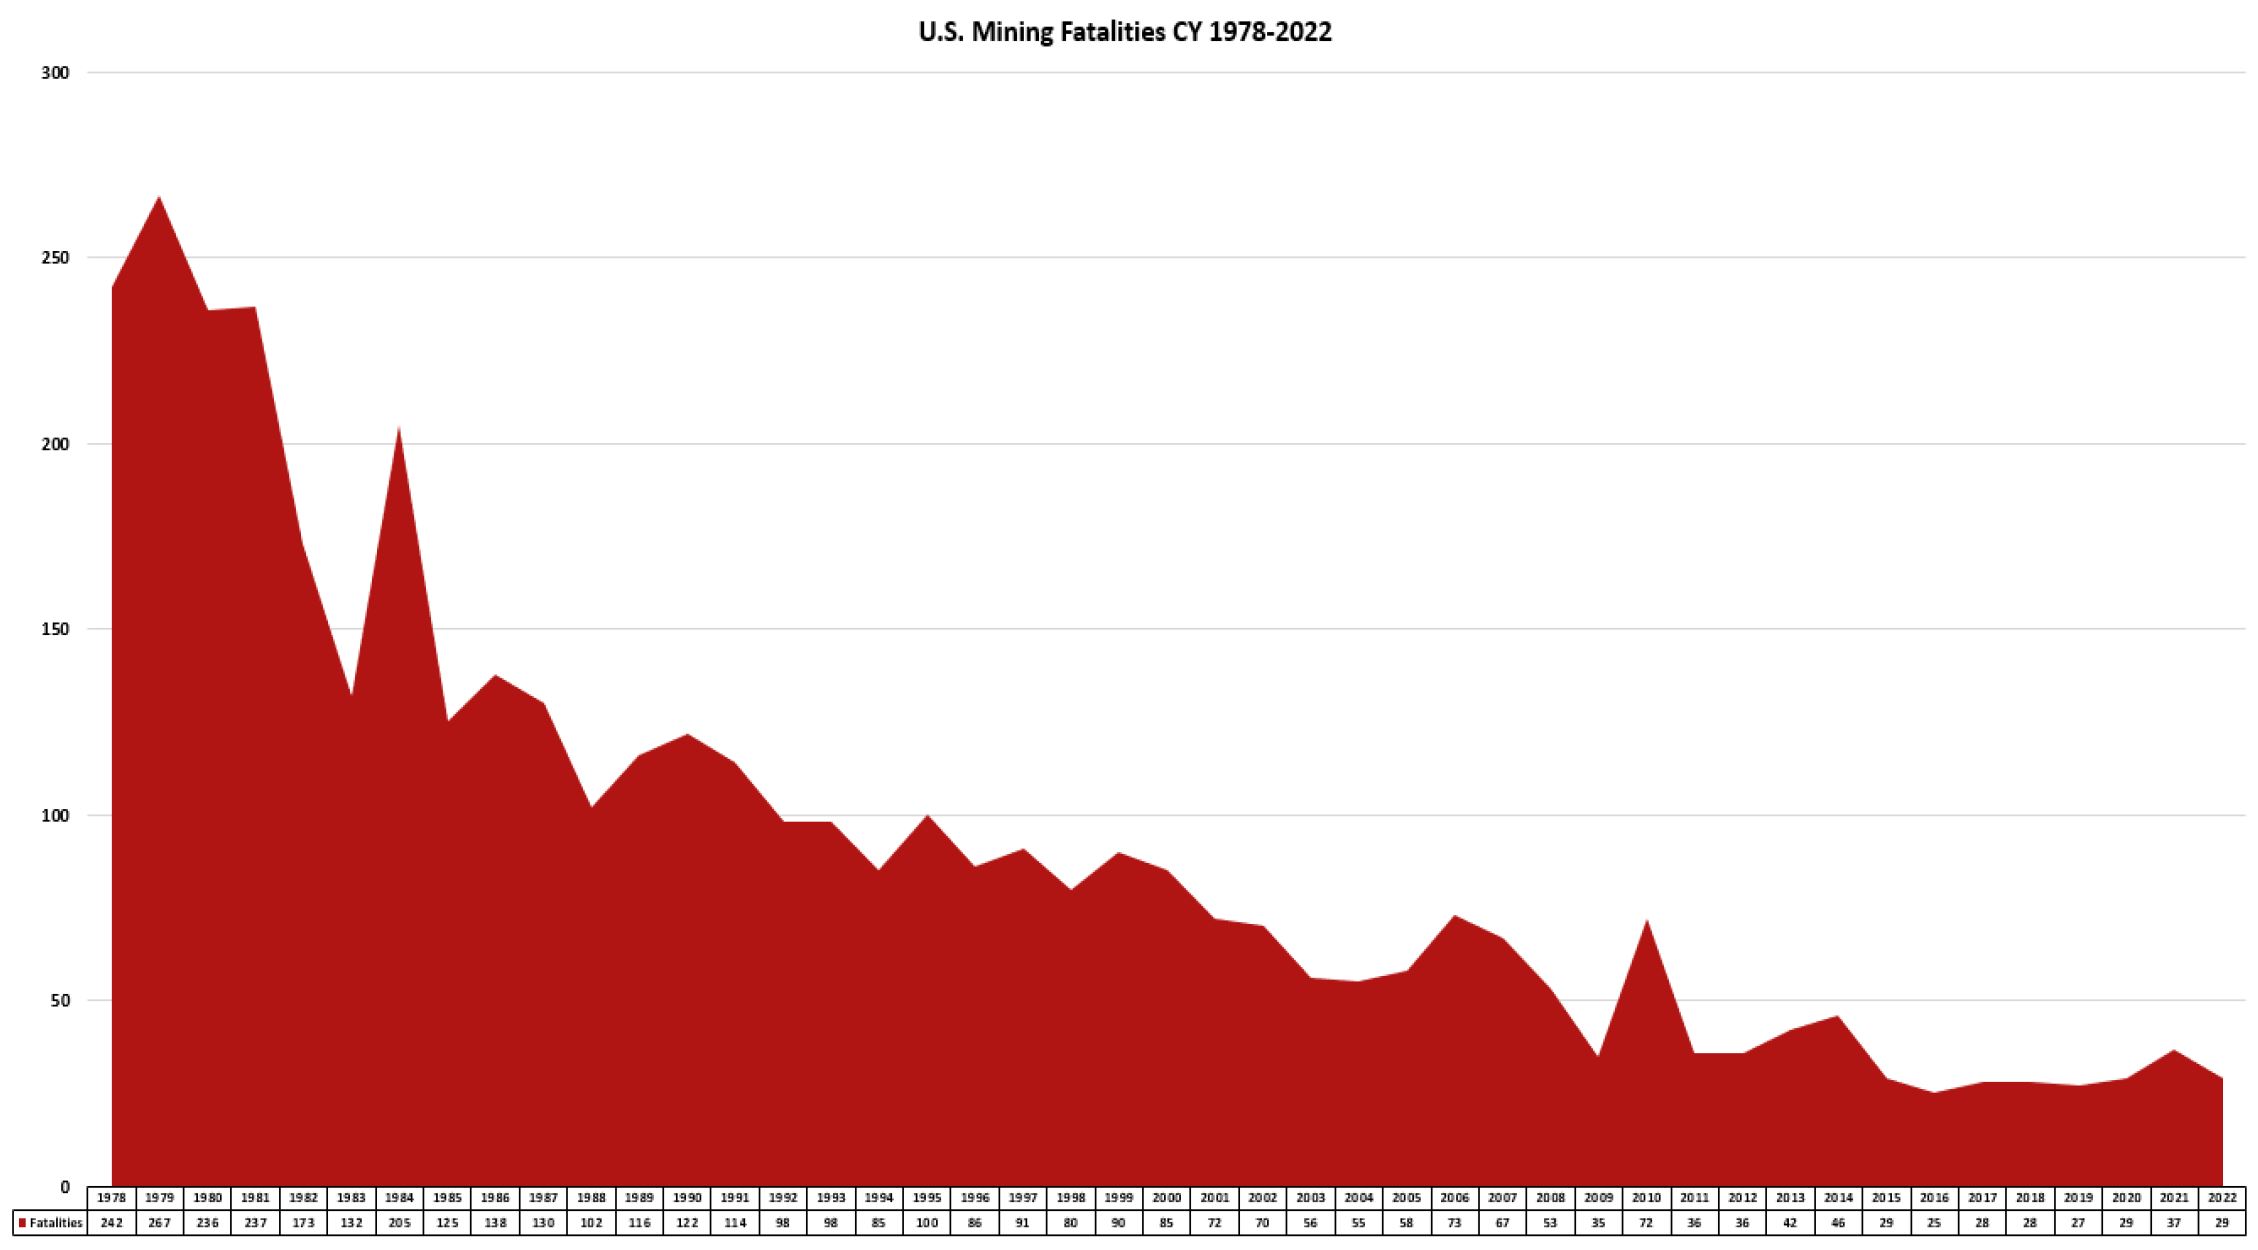 Downward trend of US Mining fatalities from 1978-2022